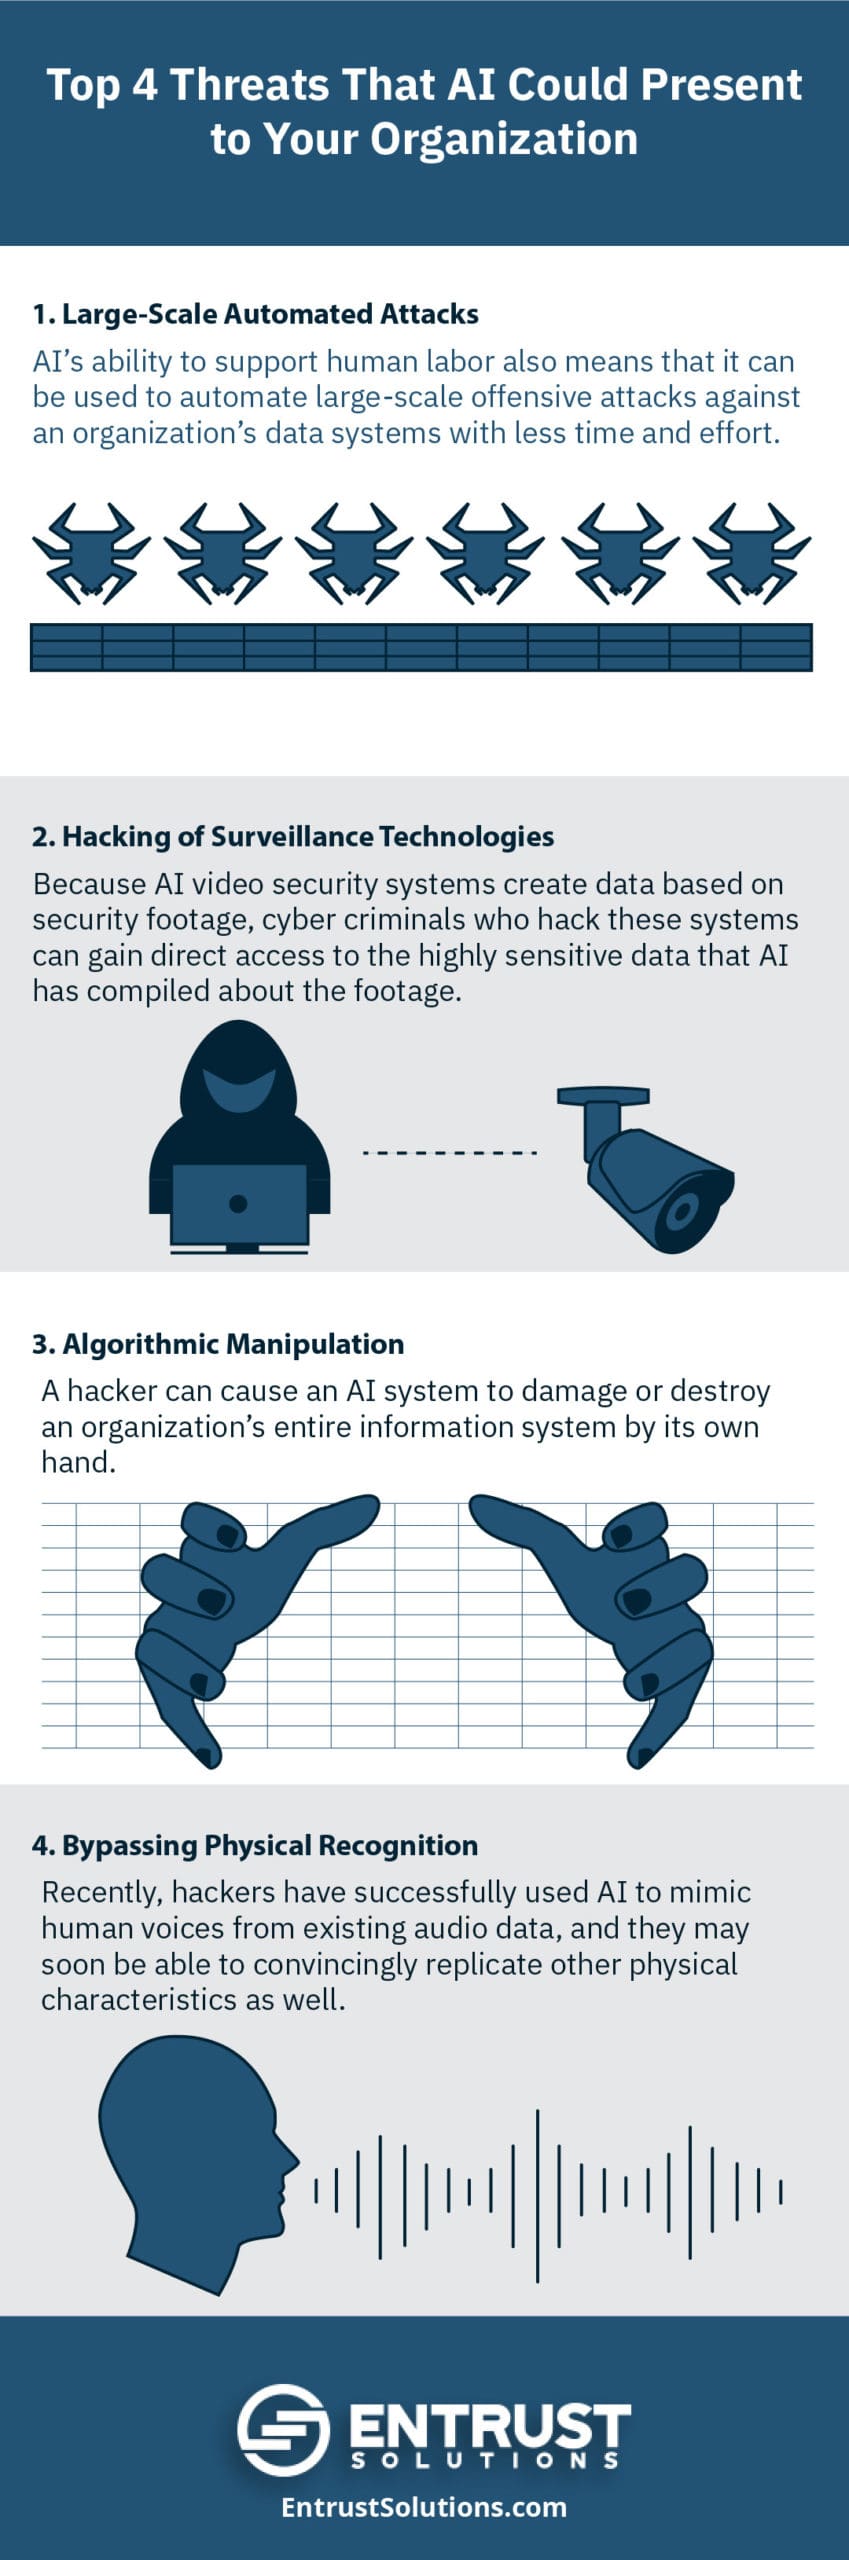 An Sentient Digital, Inc. infographic about the top four threats that AI could present to your organization.